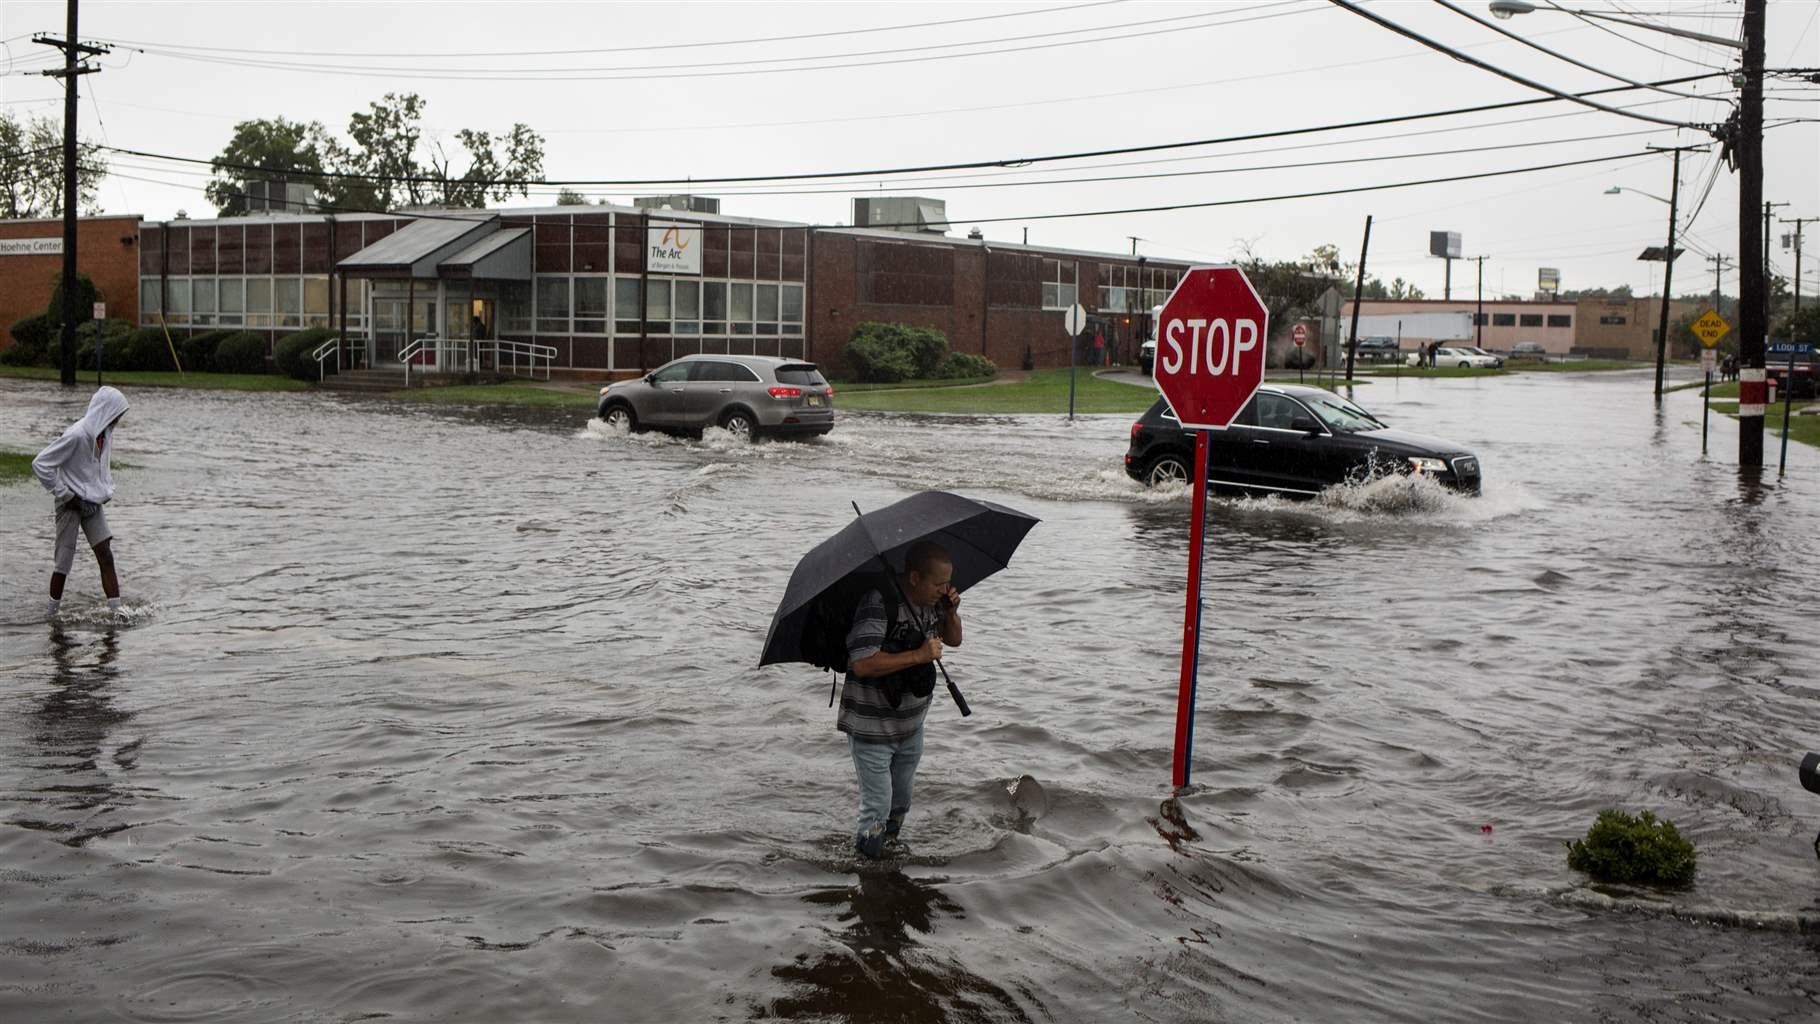 New Jersey Law Helps Cities Better Prepare for Floods.